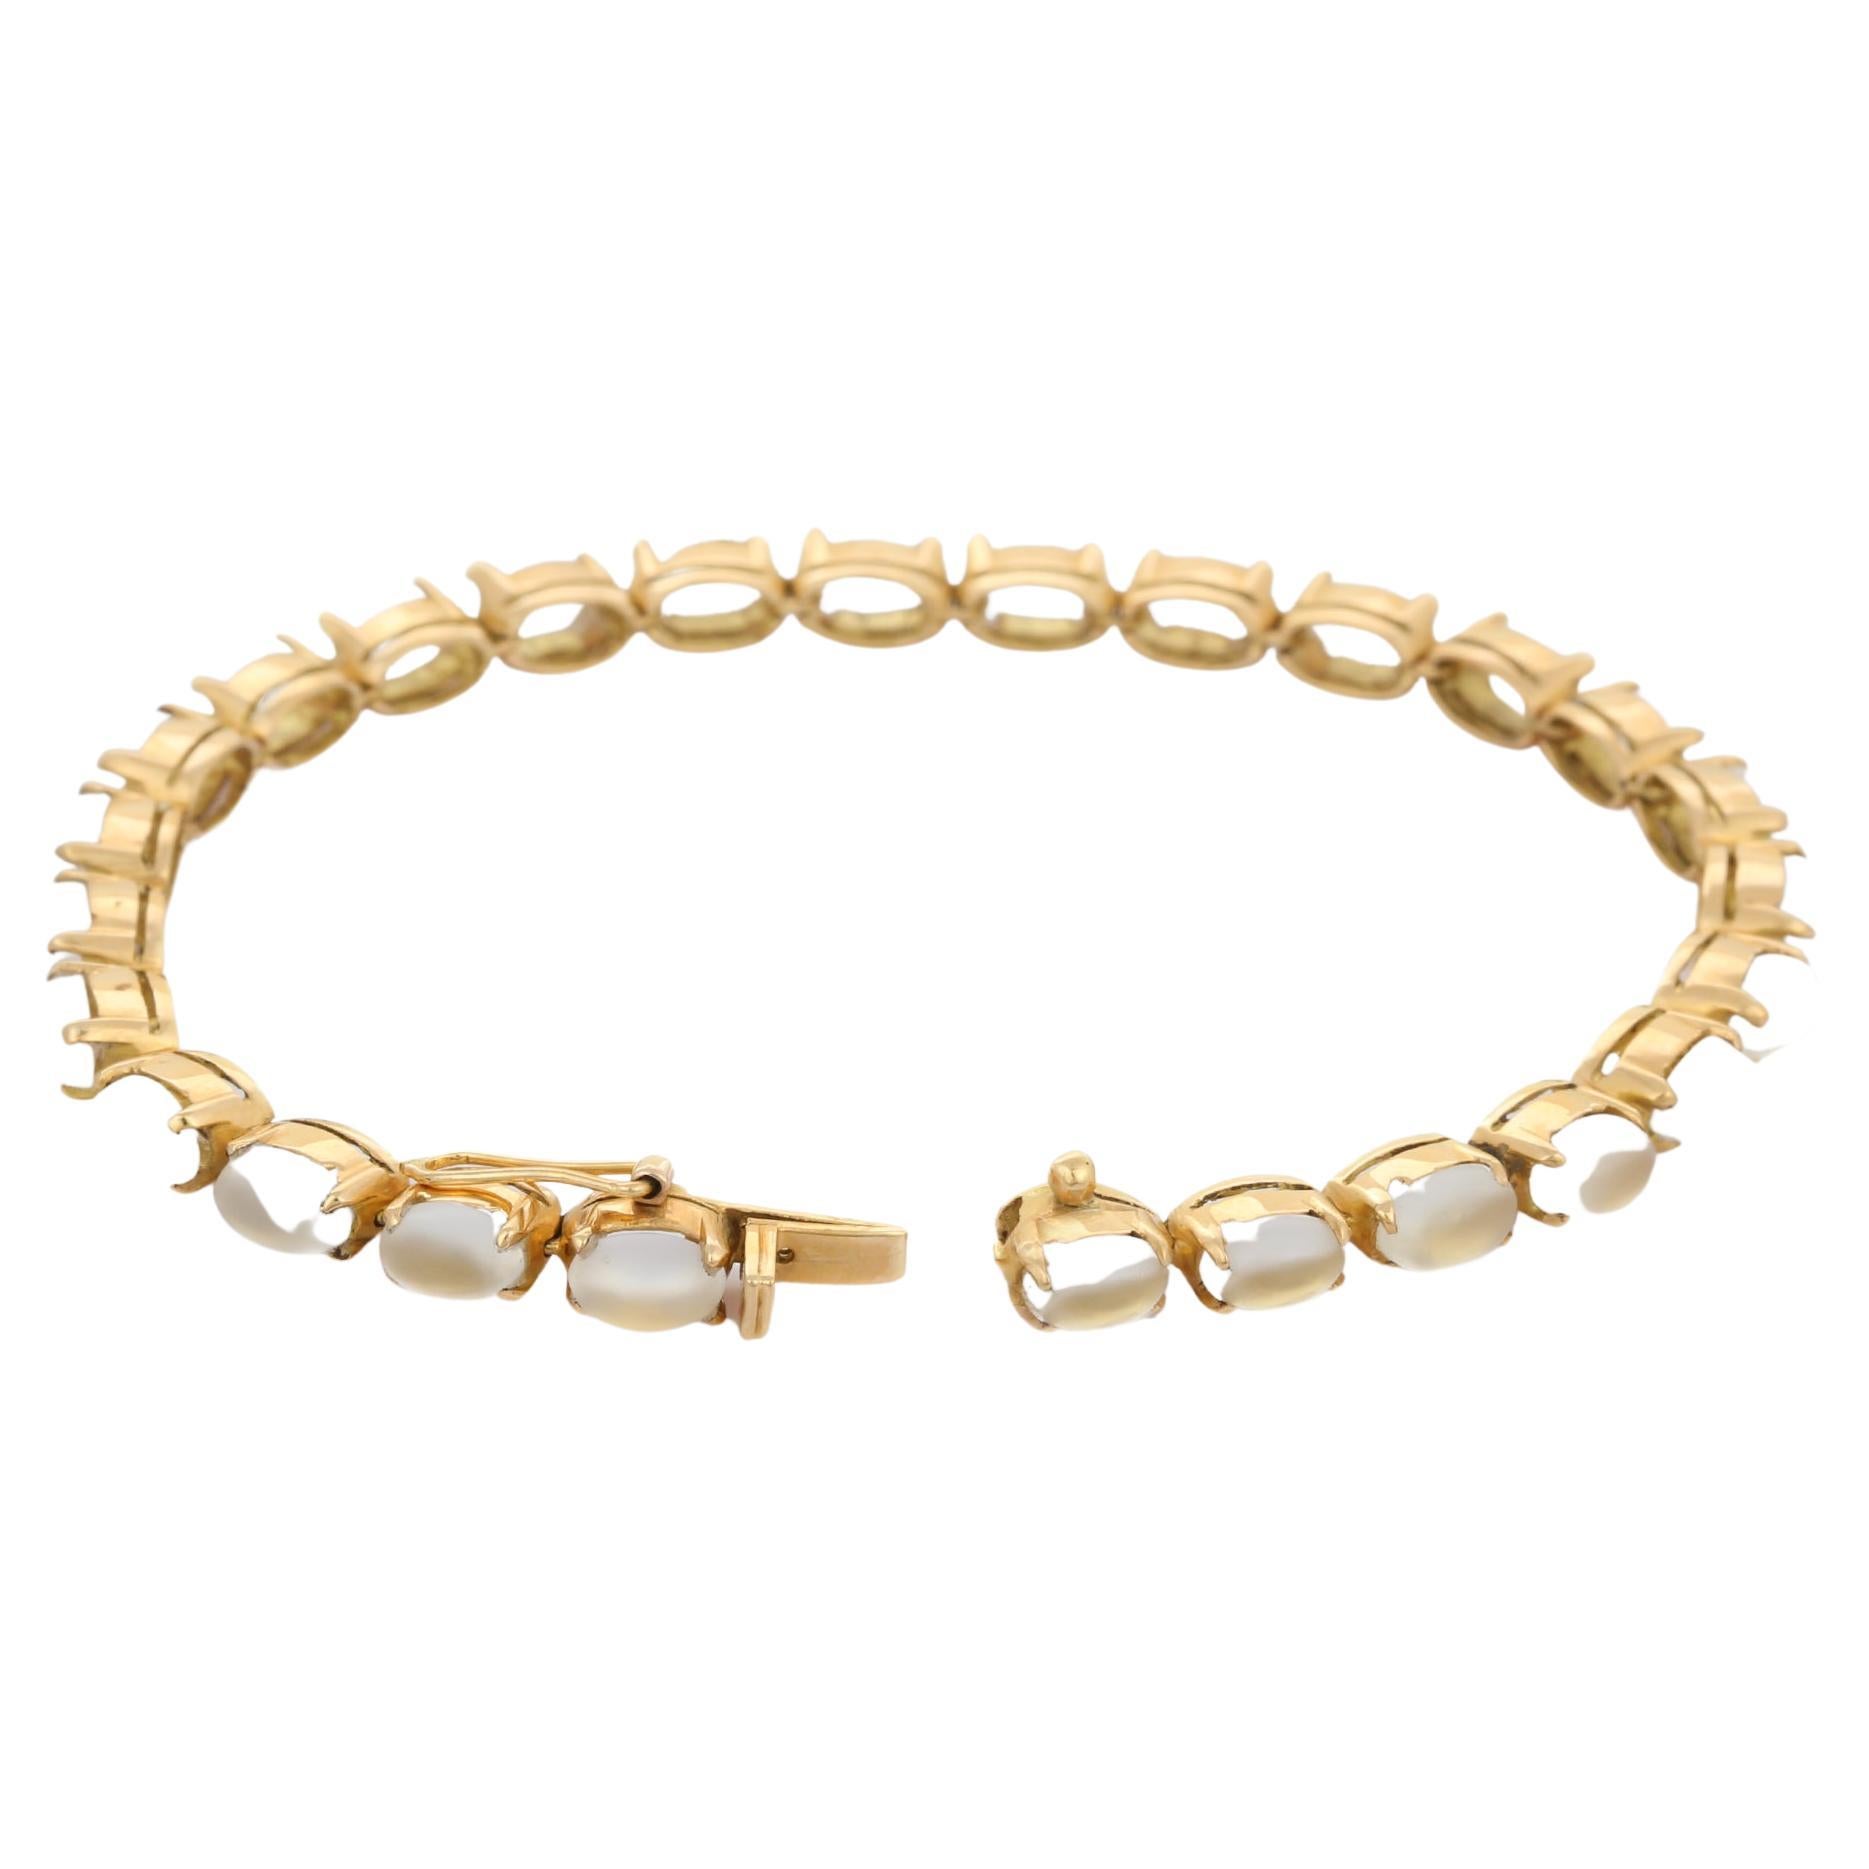 This 15 Carat Cabochon Rainbow Moonstone Tennis Bracelet for Mom in 18K gold showcases 26 endlessly sparkling natural rainbow moonstone, weighing 15 carats. It measures 7.25 inches long in length. 
Rainbow moonstone brings balance, harmony and